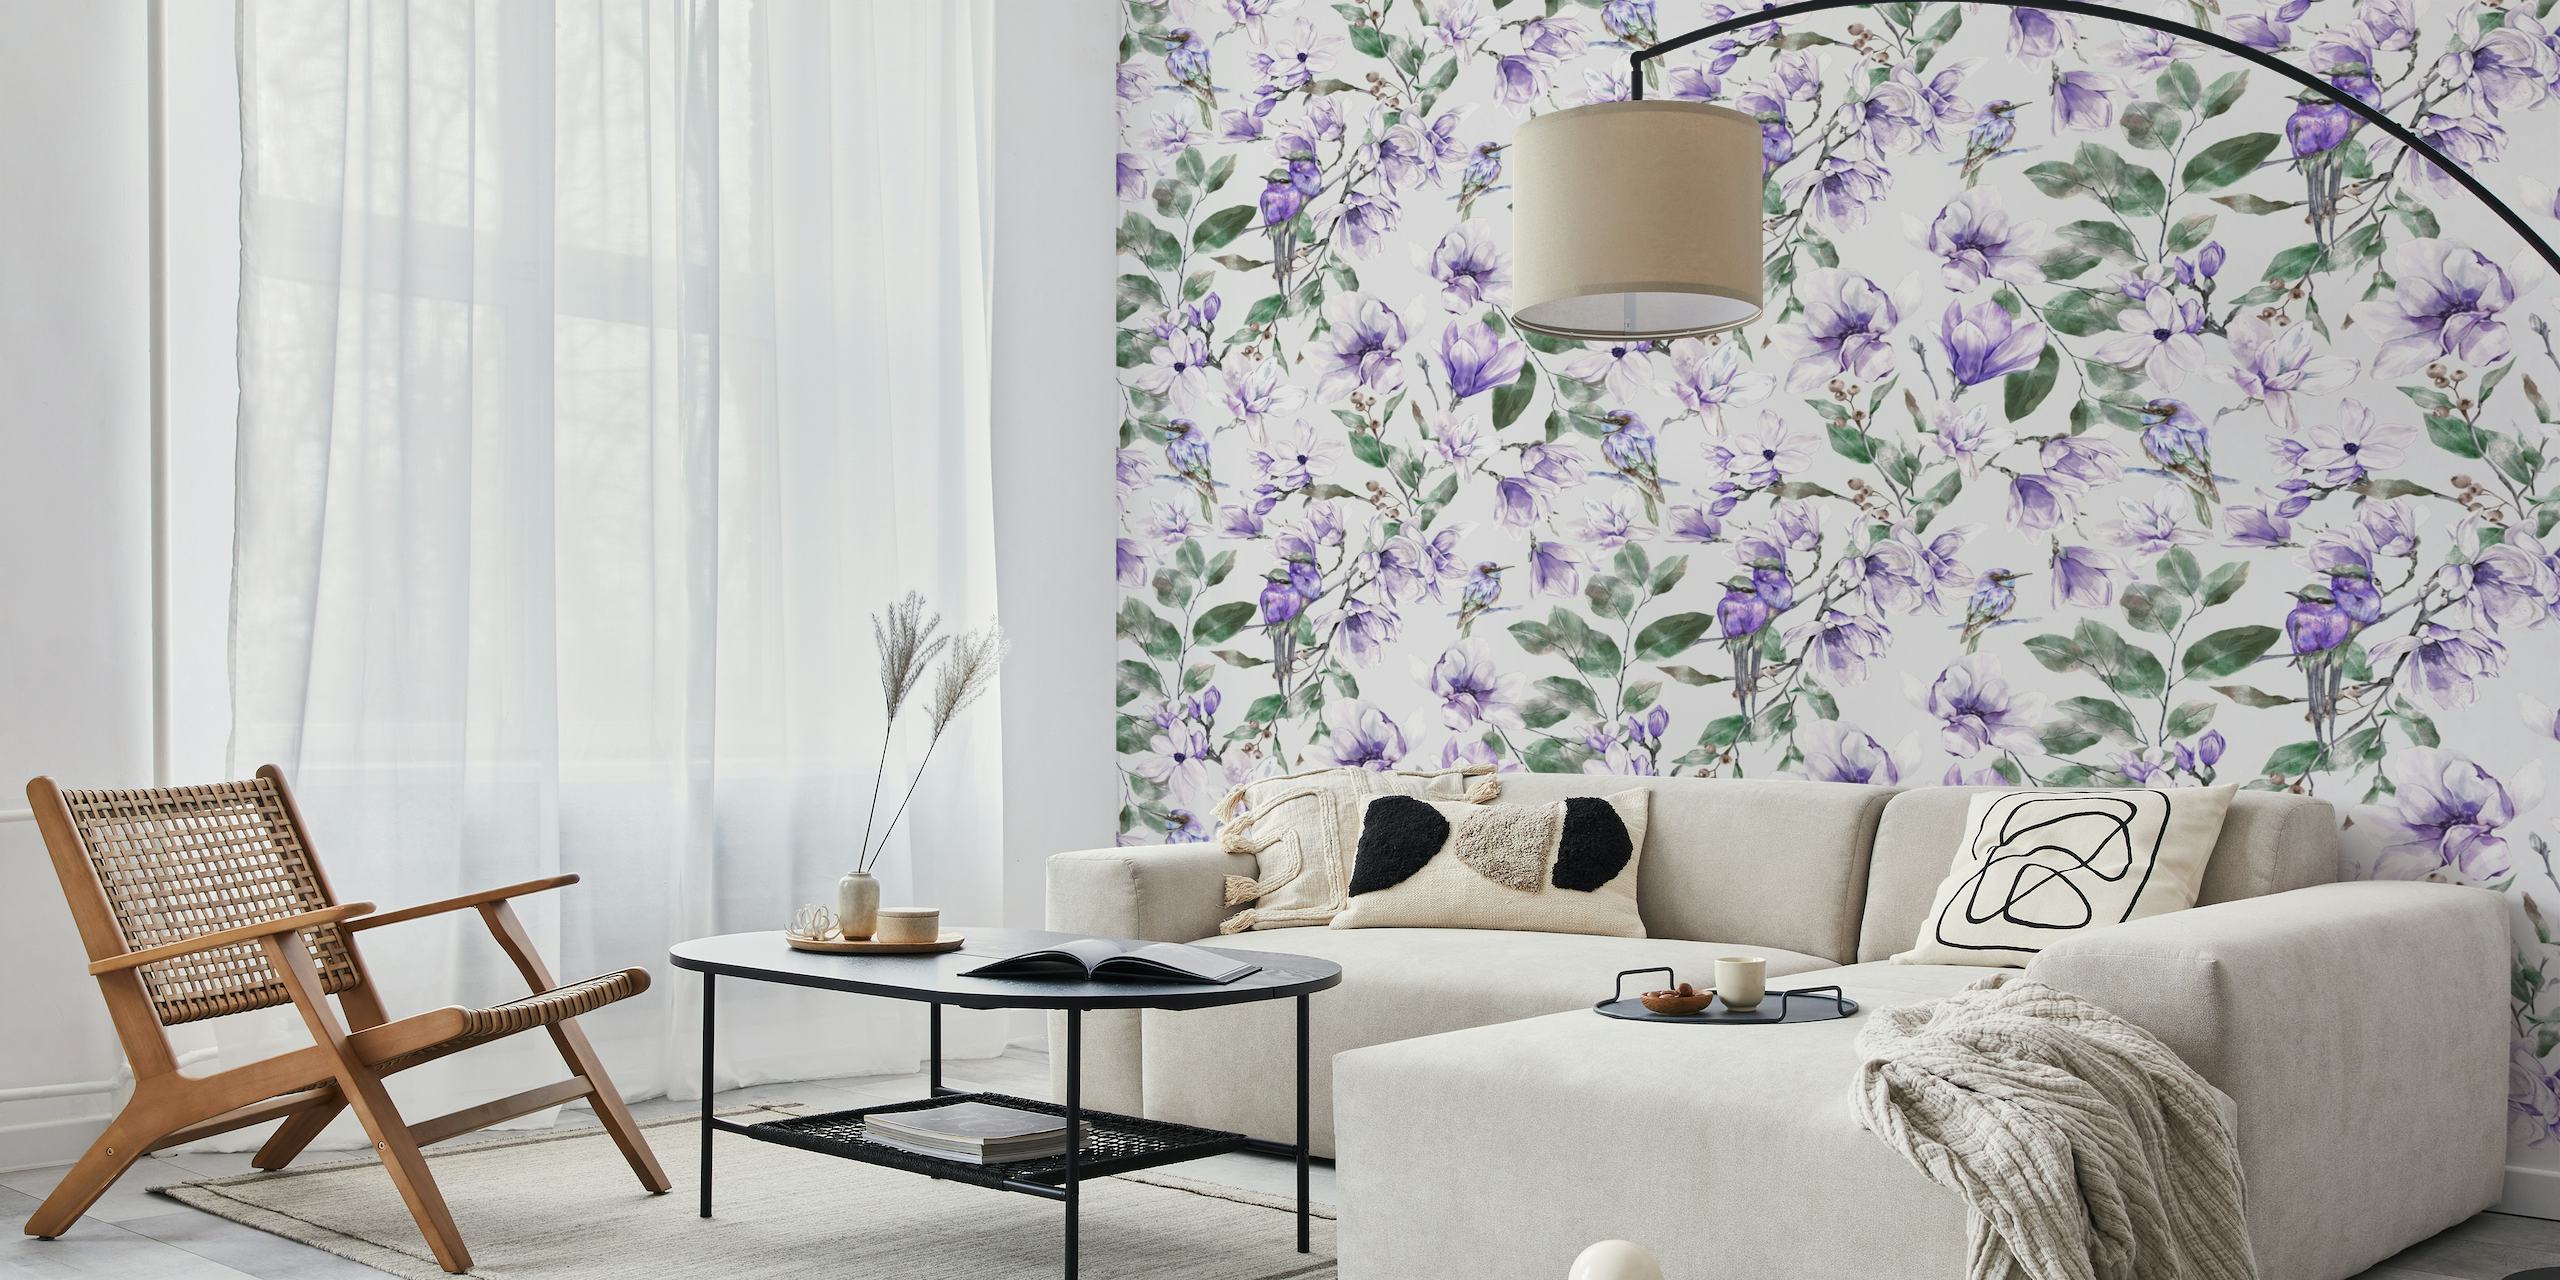 Asian Violet 1 wall mural featuring delicate purple flowers and green leaves on a light background